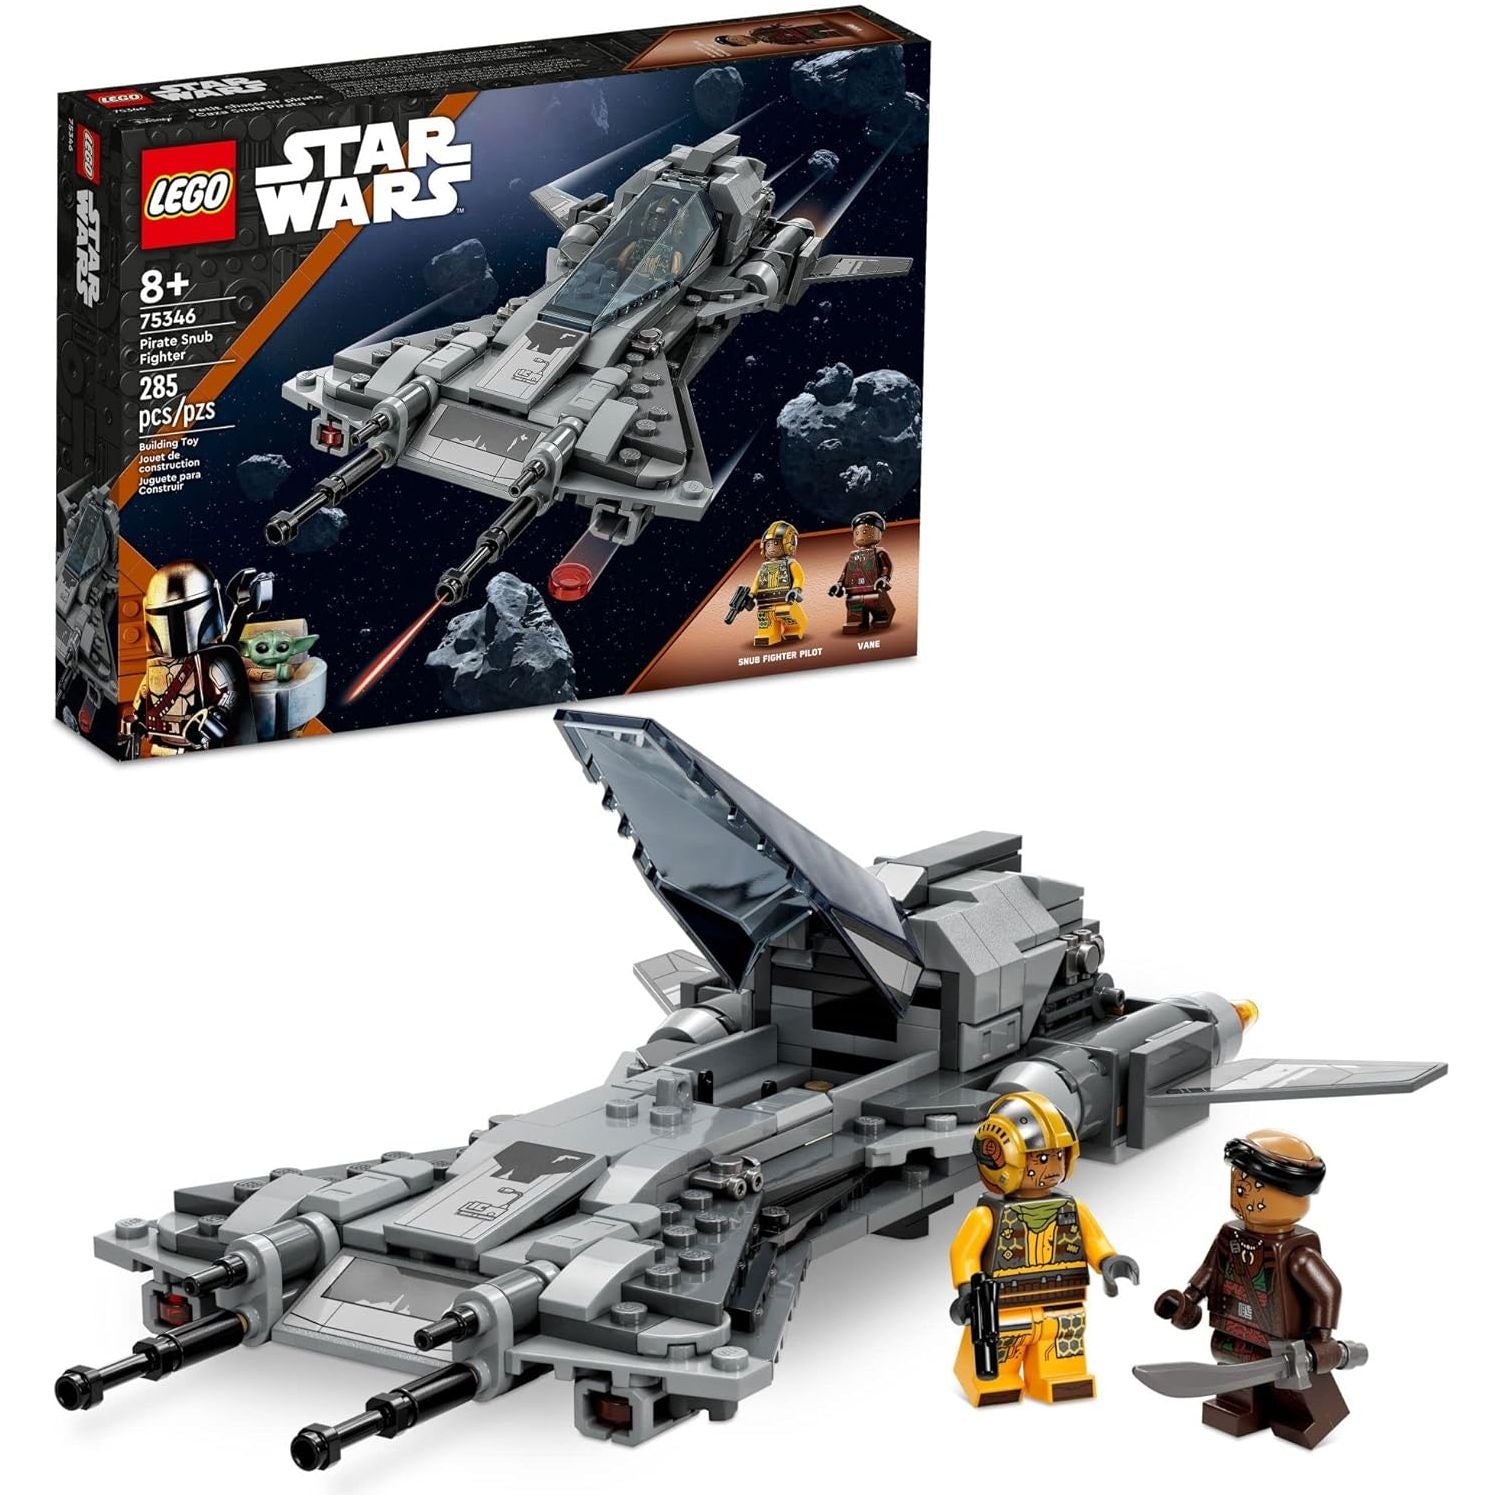 LEGO 75346 Star Wars Pirate Snub Fighter Buildable Starfighter Playset Featuring Pirate Pilot and Vane Characters from The Mandalorian Season 3